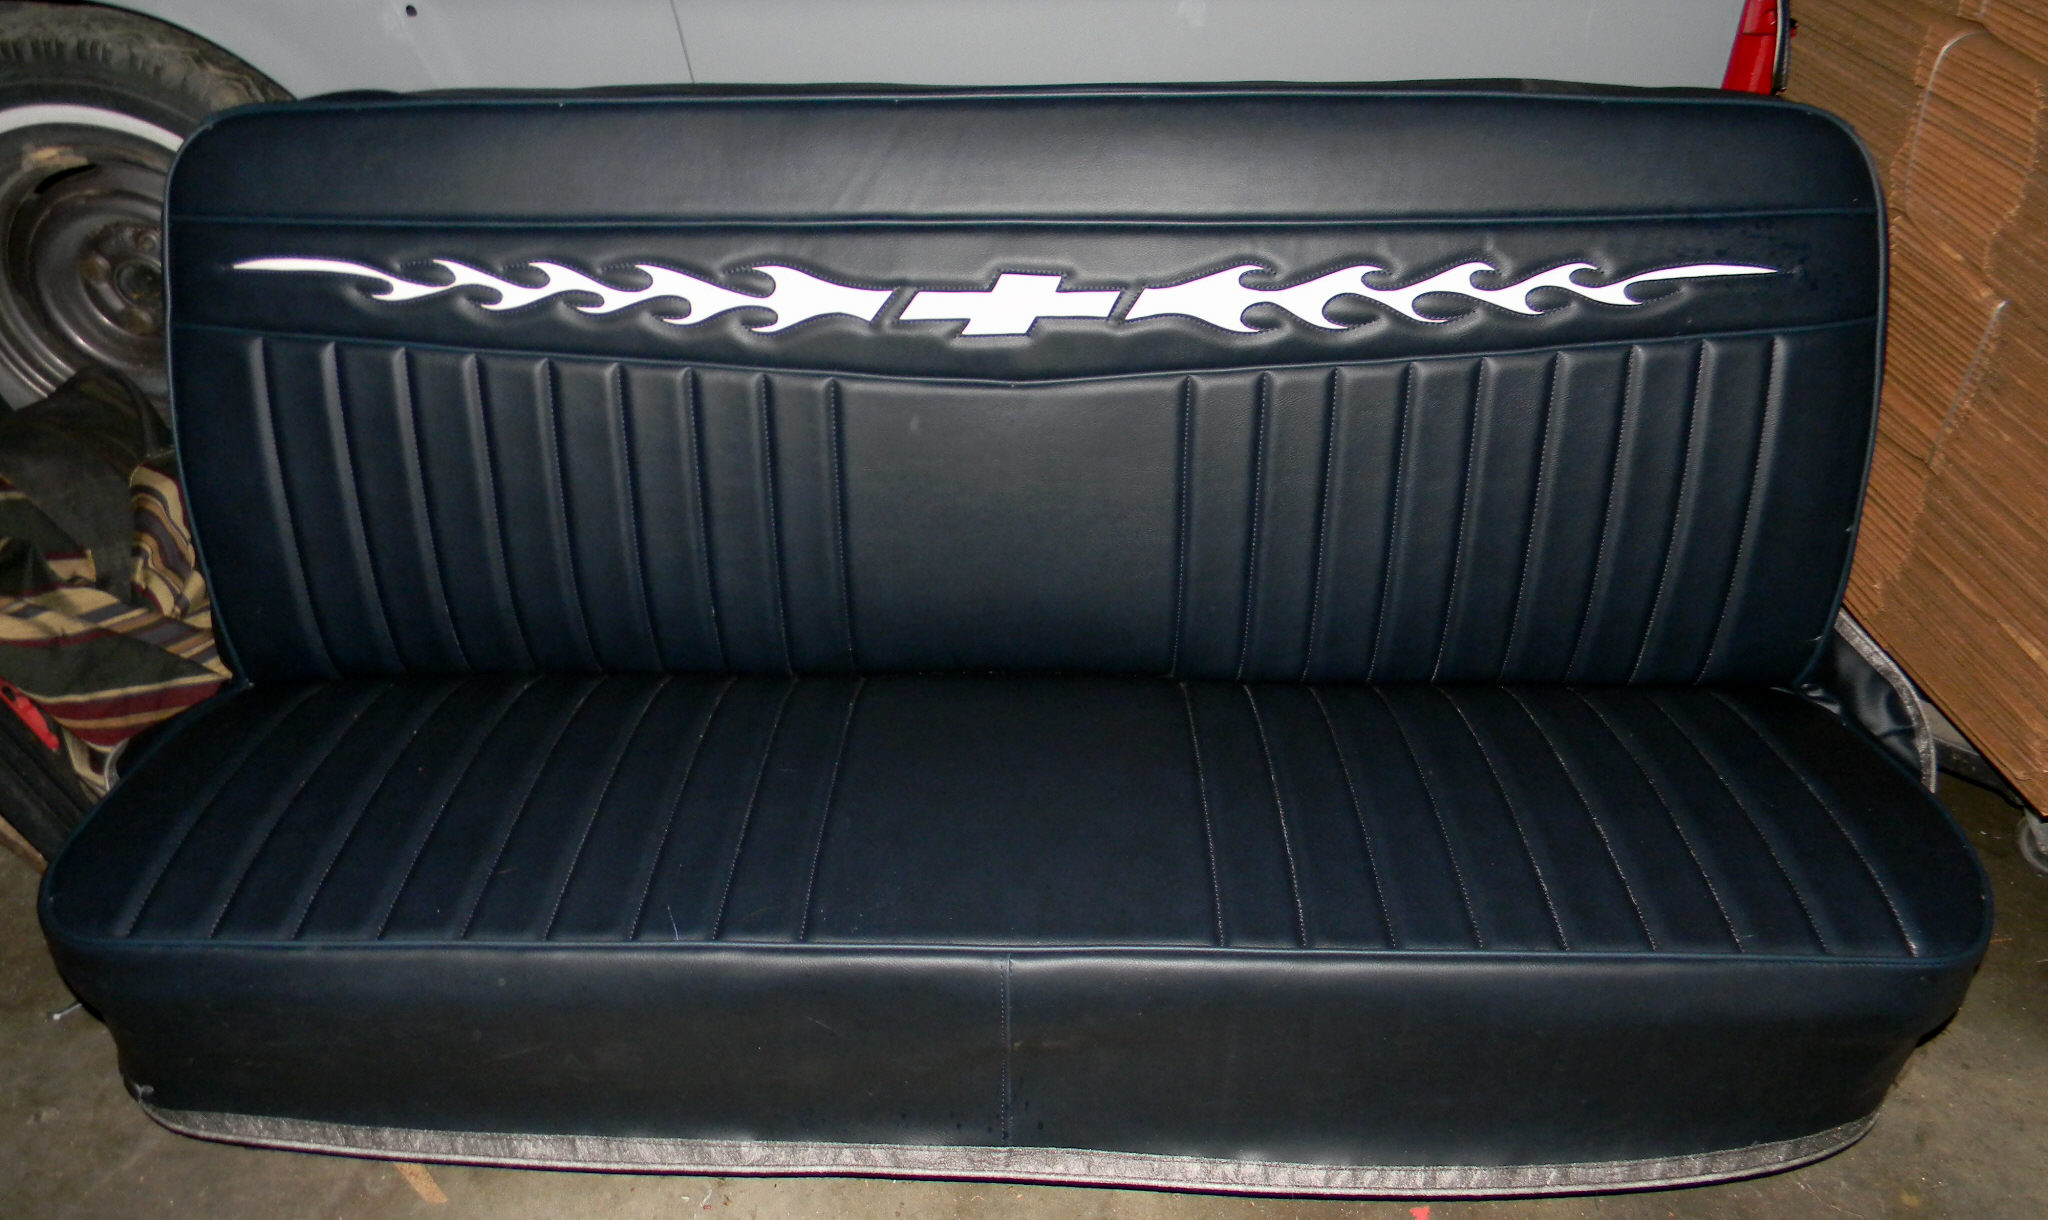 47-87 Chevy Truck seat cover